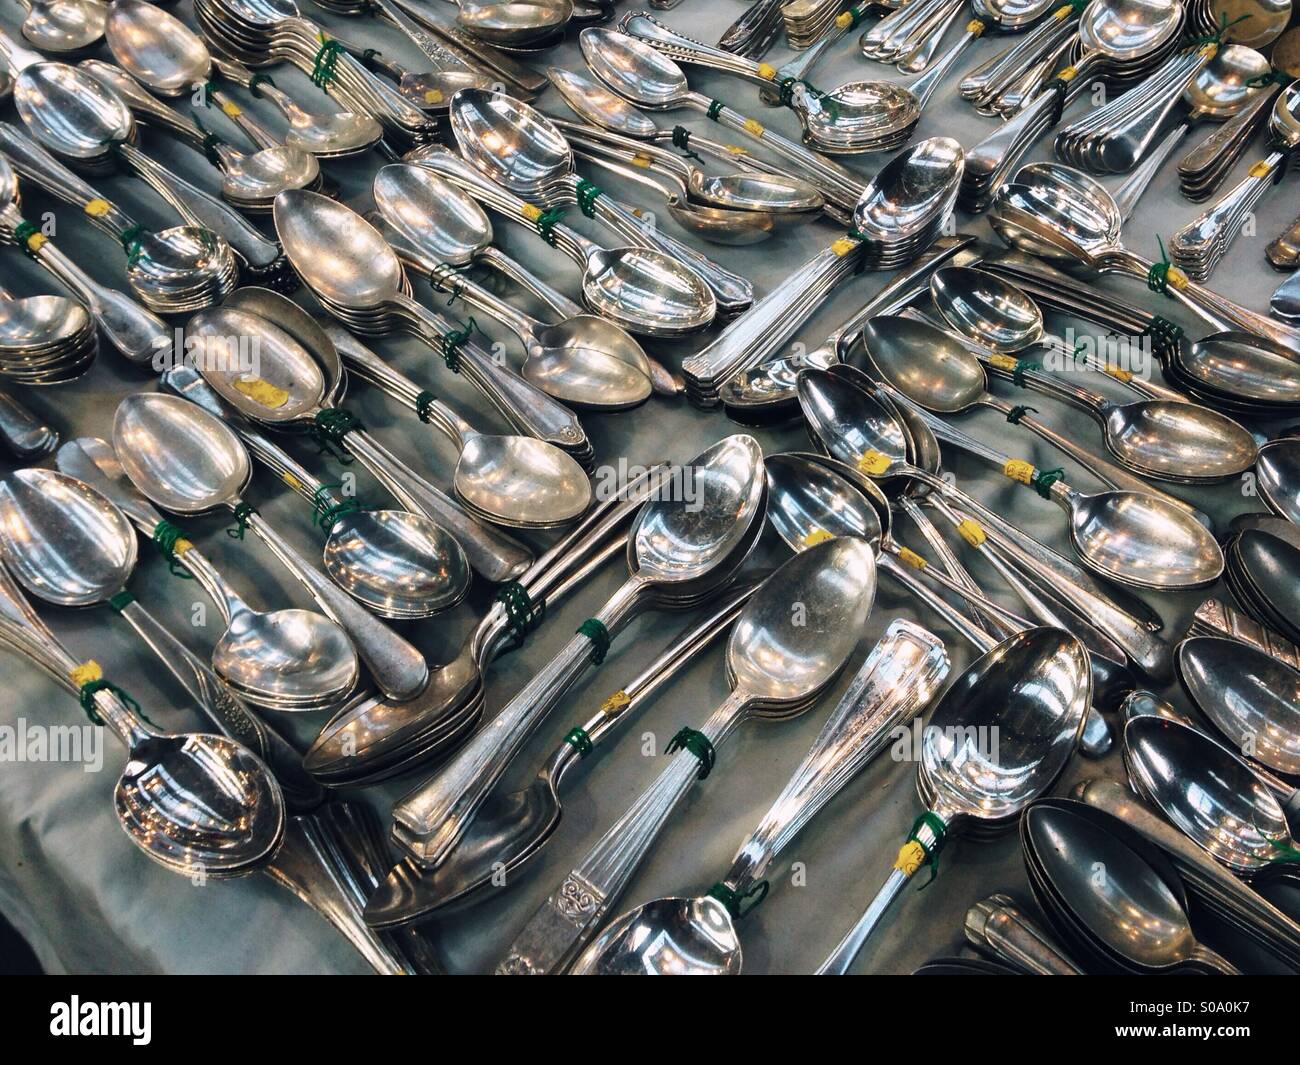 Silver spoons for sale at an antiques market Stock Photo